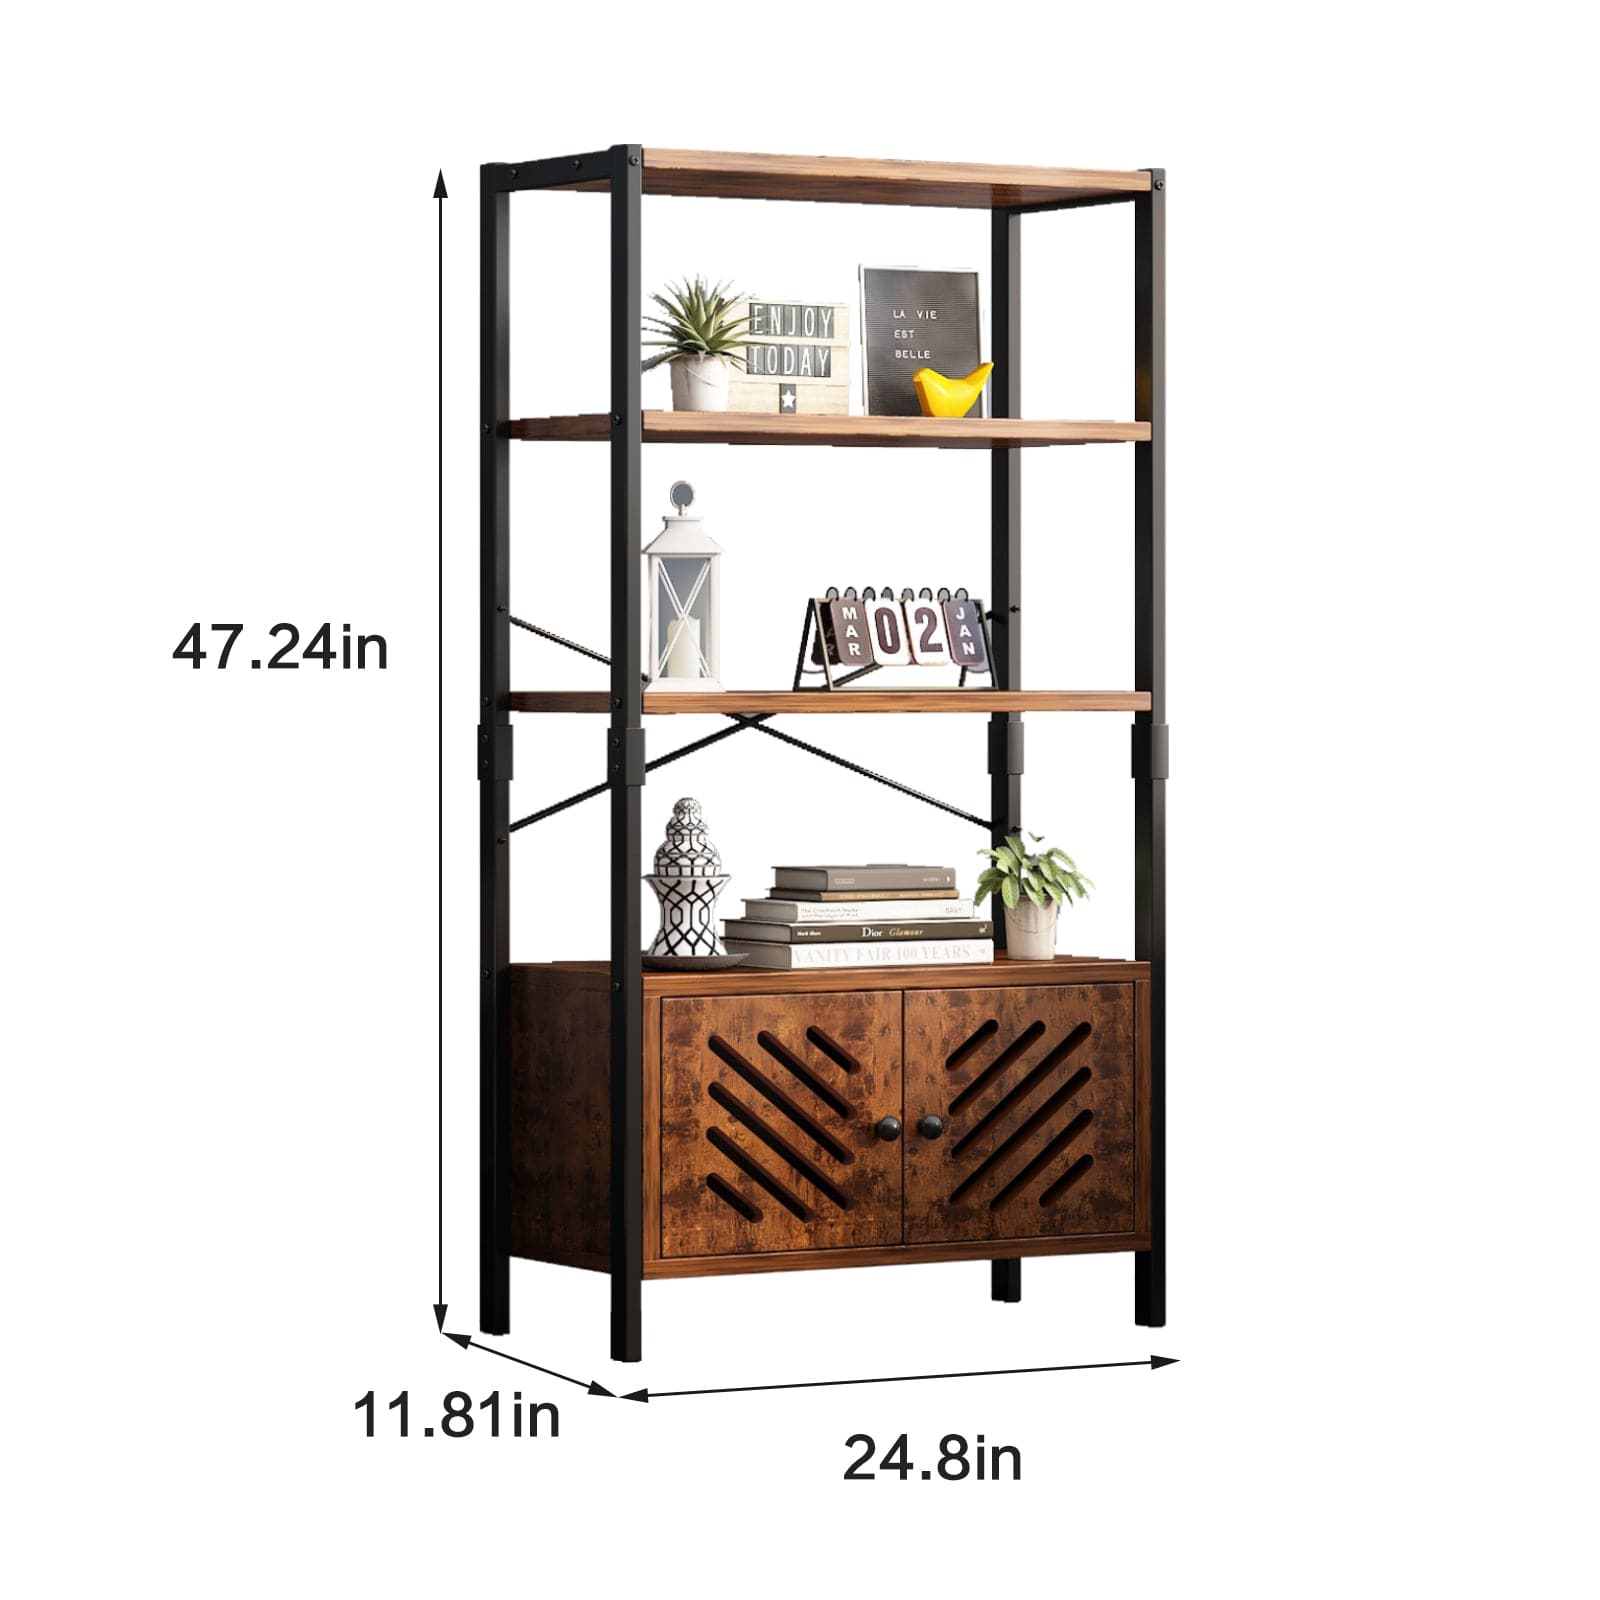 Bookshelf, Storage Cabinet with 3 Shelves and 2 Louvered Doors size introduction